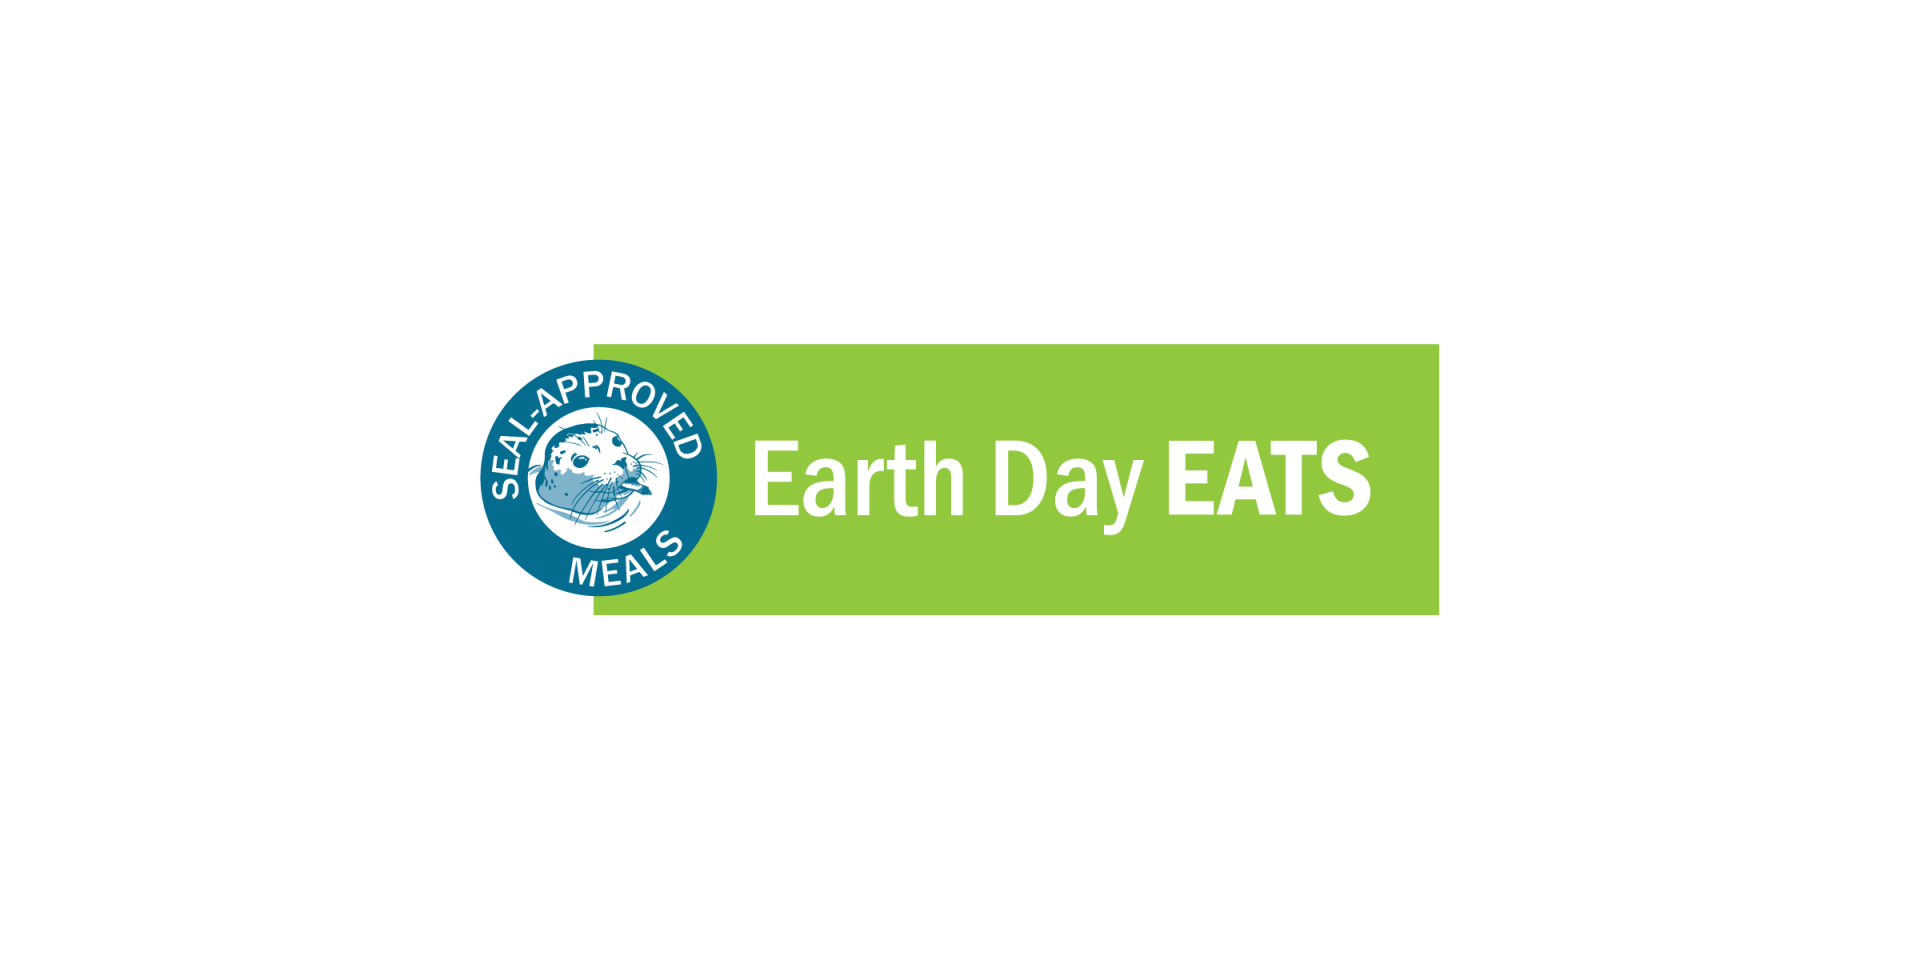 Seal Approved Meals Campaign Earth Day Eats Branding